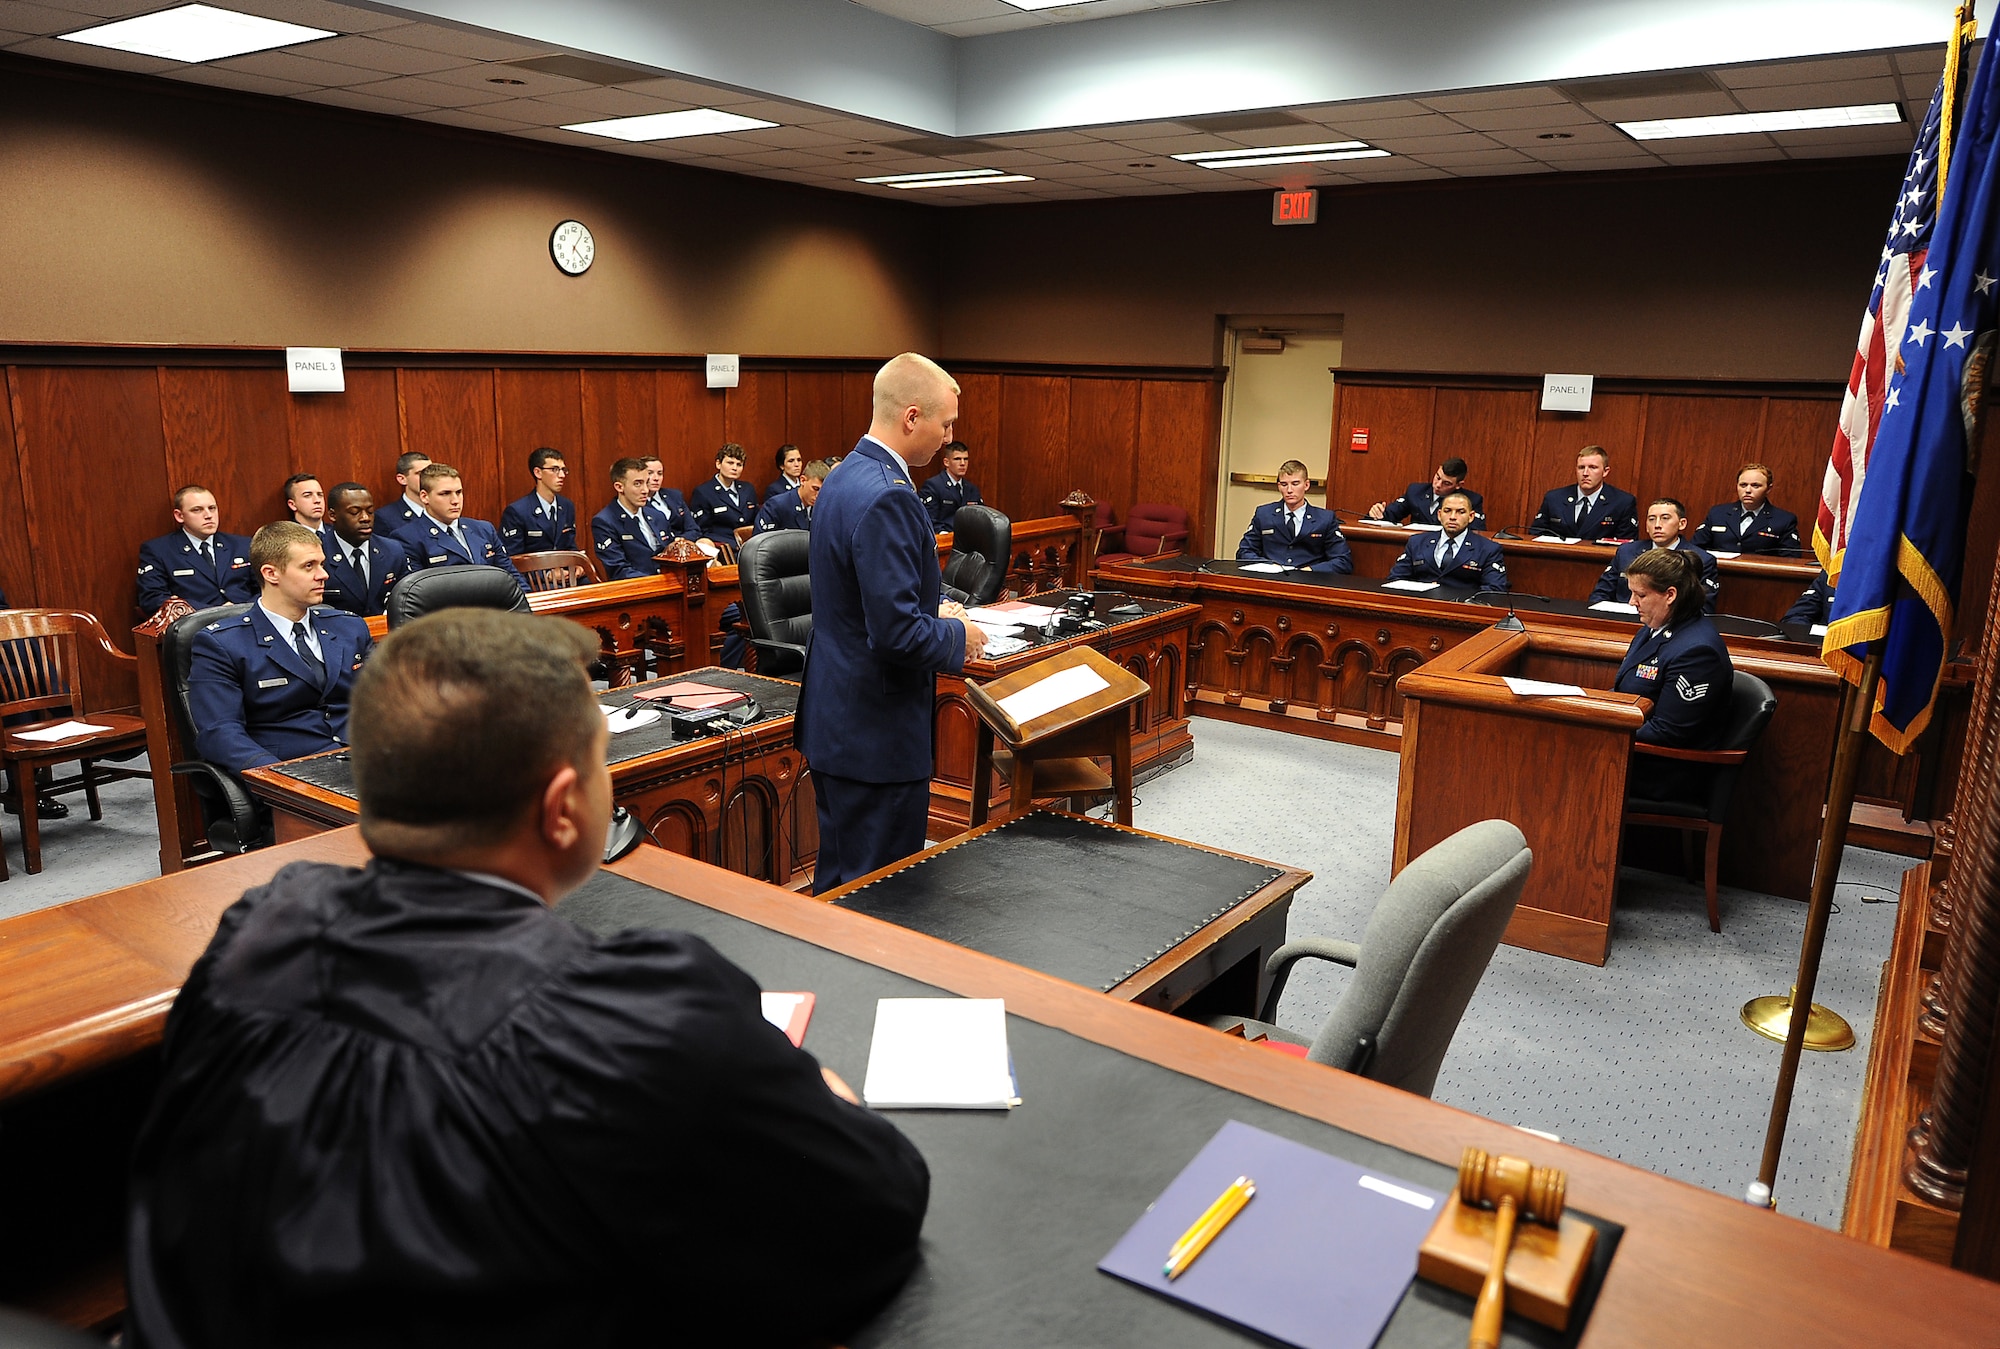 U.S. Air Force 2nd Lt. Ryan Crnkovich, 55th Wing legal intern, cross examines a simulated victim of sexual assault while acting as the defense counsel in a ‘mock trial’ held July 10 inside the Offutt AFB court room. All Airmen attending the week-long First Term Airmen’s Center orientation course will participate in a ‘mock trial’ as part of their training. The 55th Wing legal office created the program with the goal of preventing sexual assault through education and awareness.  (U. S. Air Force photo/Delanie Stafford)